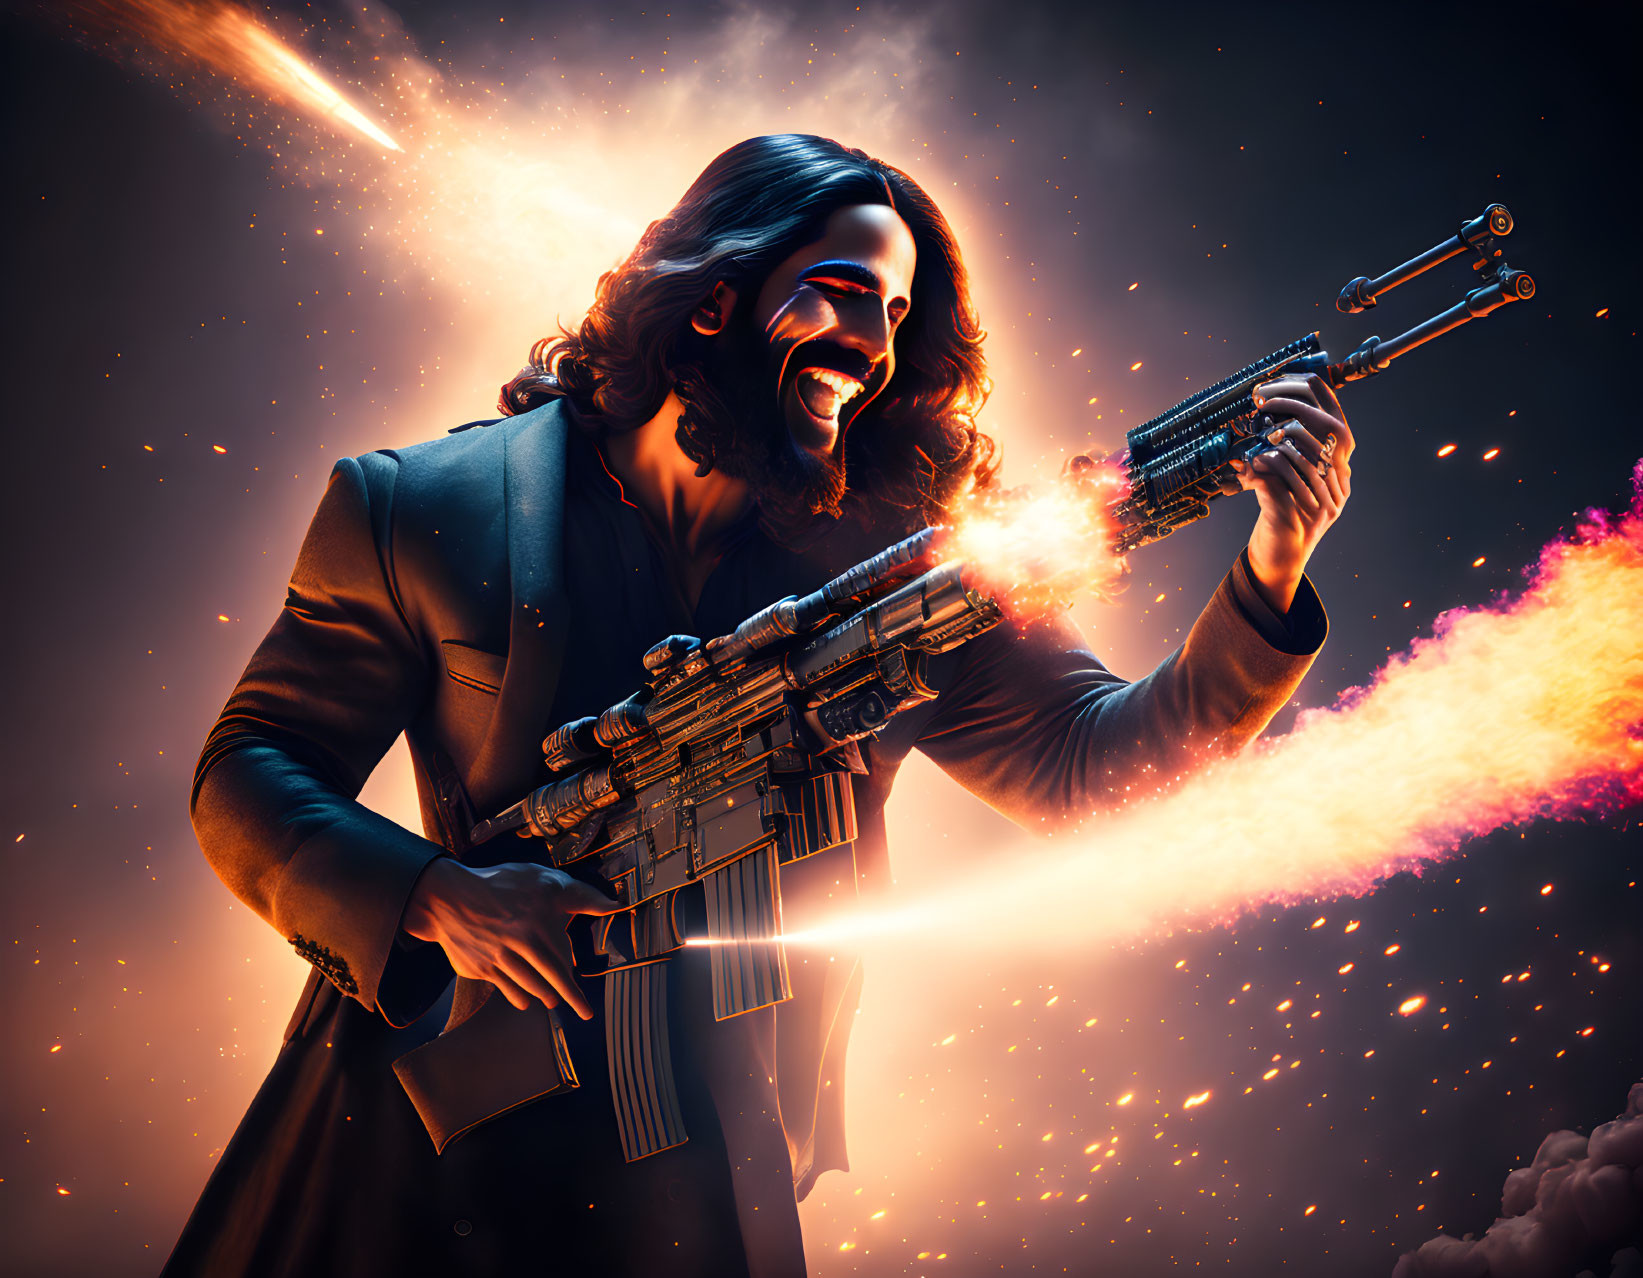 Stylized character with guns in cosmic scene with comet